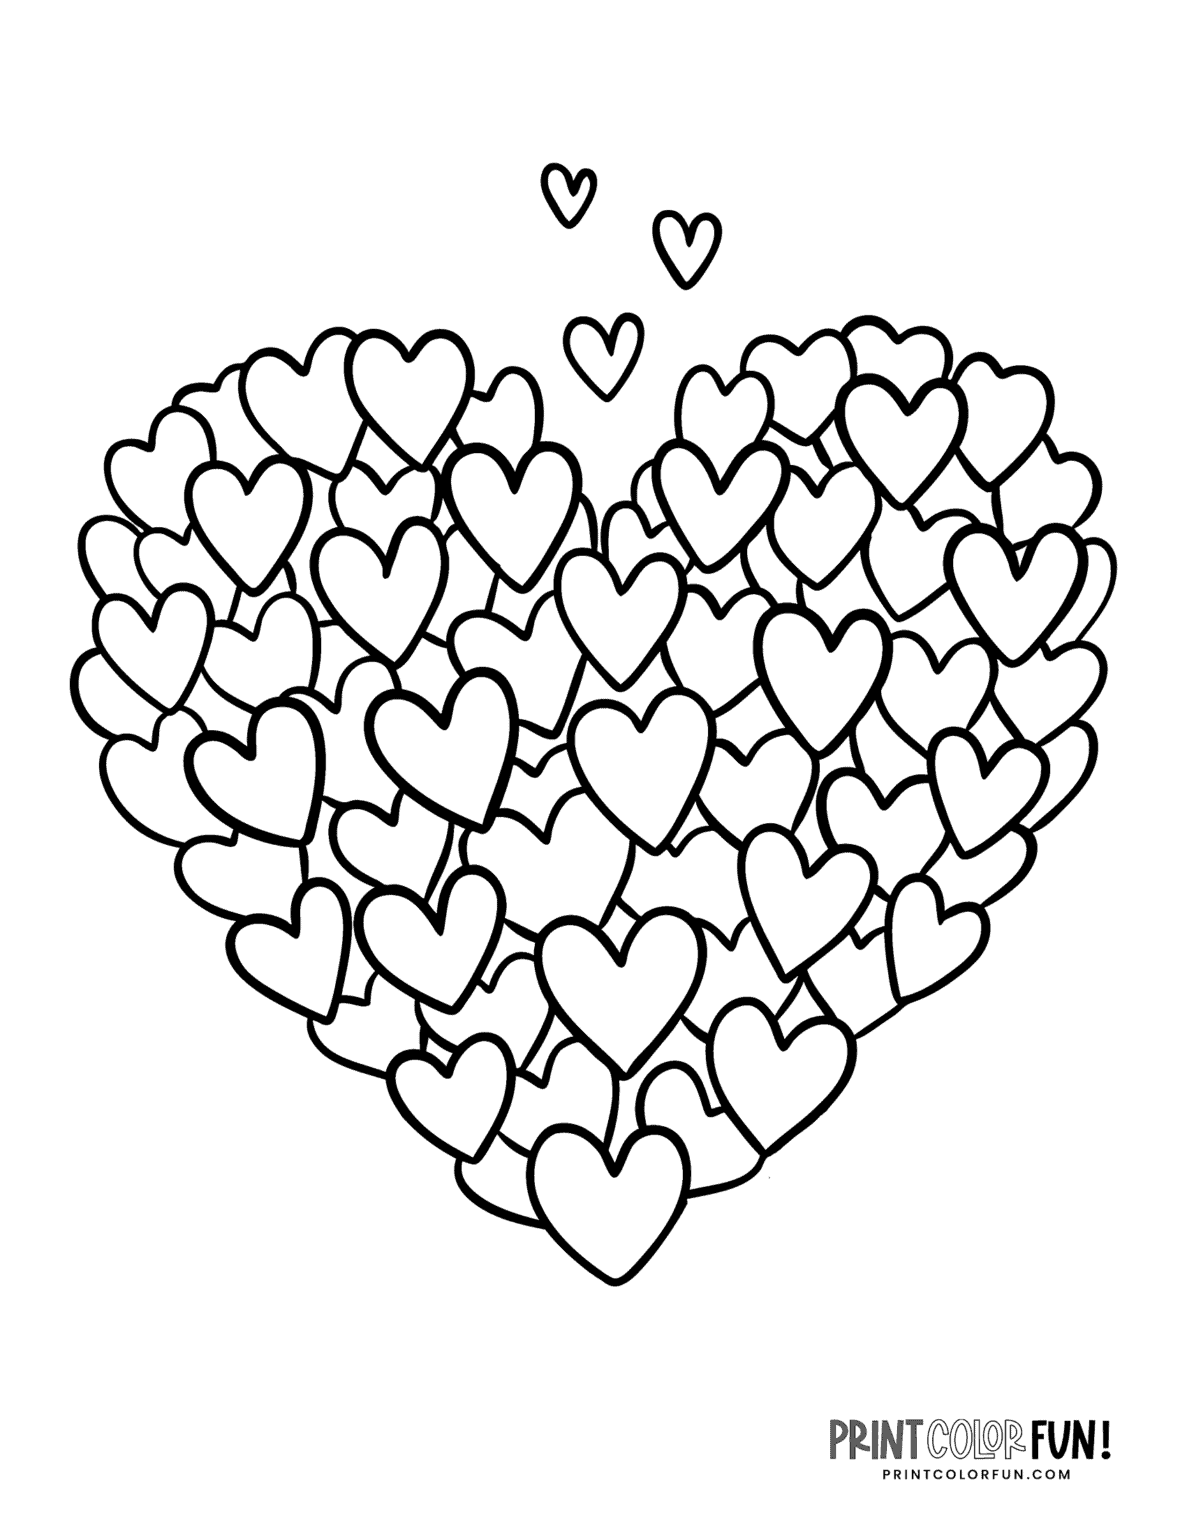 100+ Printable Heart Coloring Pages: A Huge Collection Of Hearts For